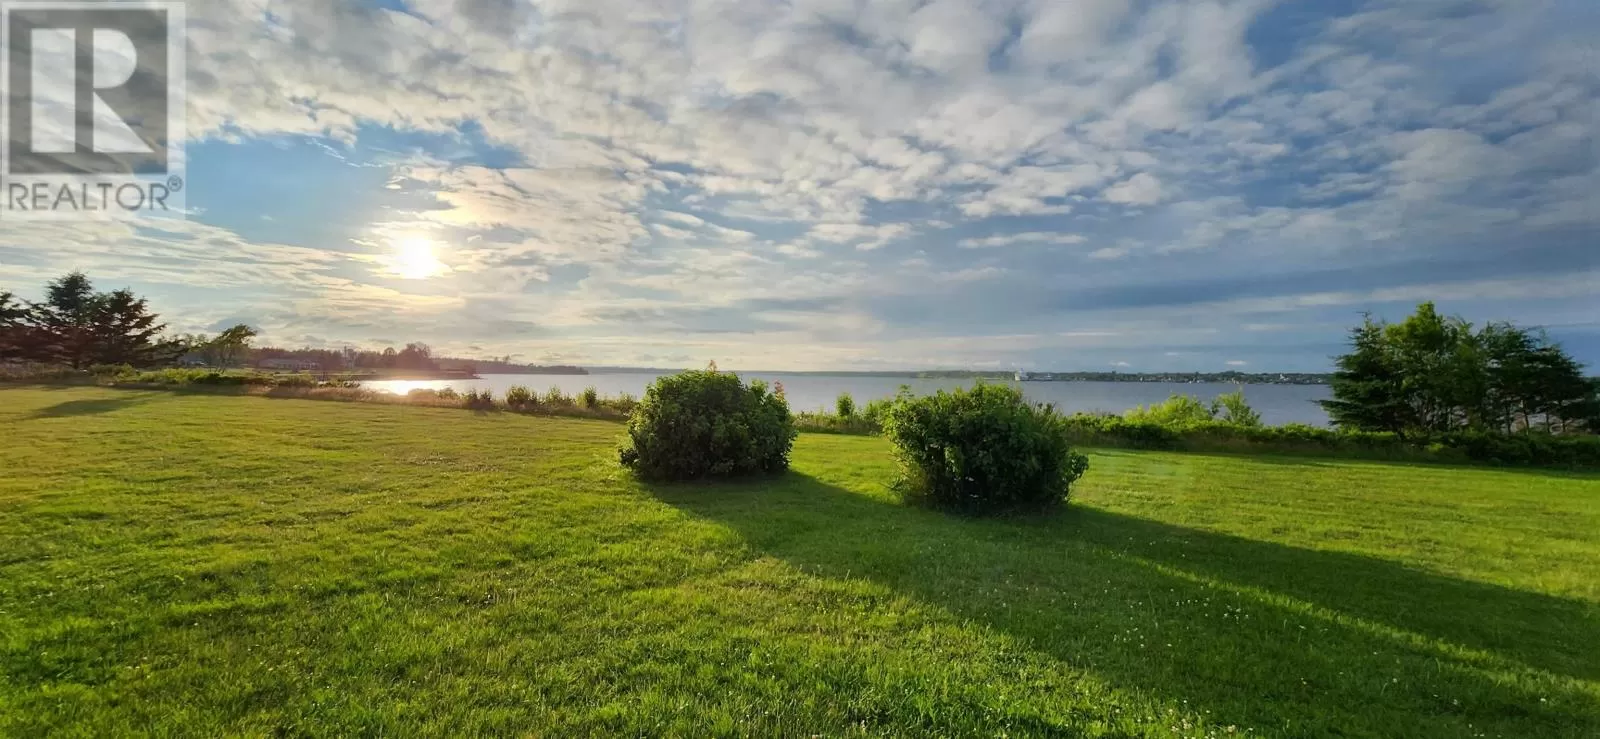 Lot 1 545 St.andrew's Point Road, Lower Montague, Prince Edward Island C0A 1R0